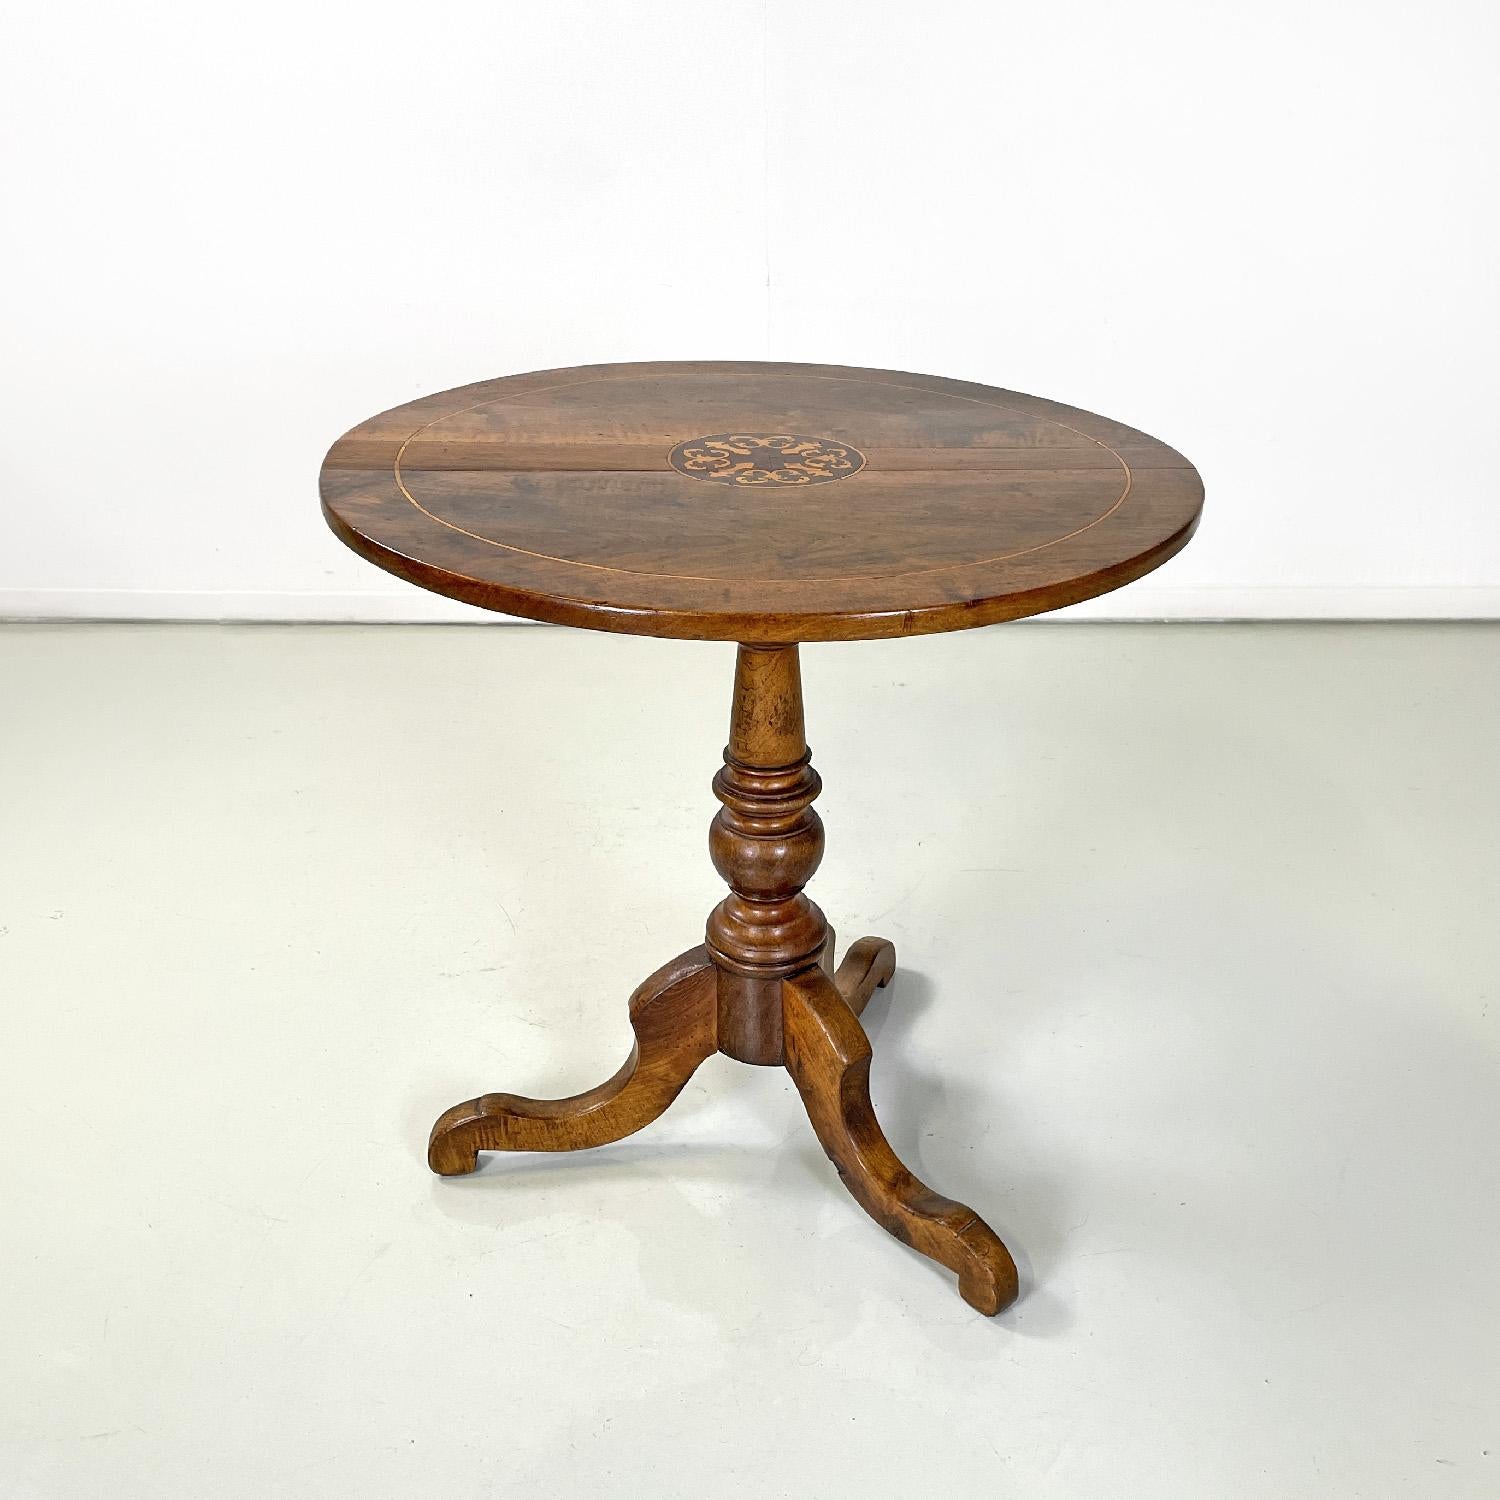 Italian antique wooden dining table with floral damask decoration, 1850s In Good Condition For Sale In MIlano, IT